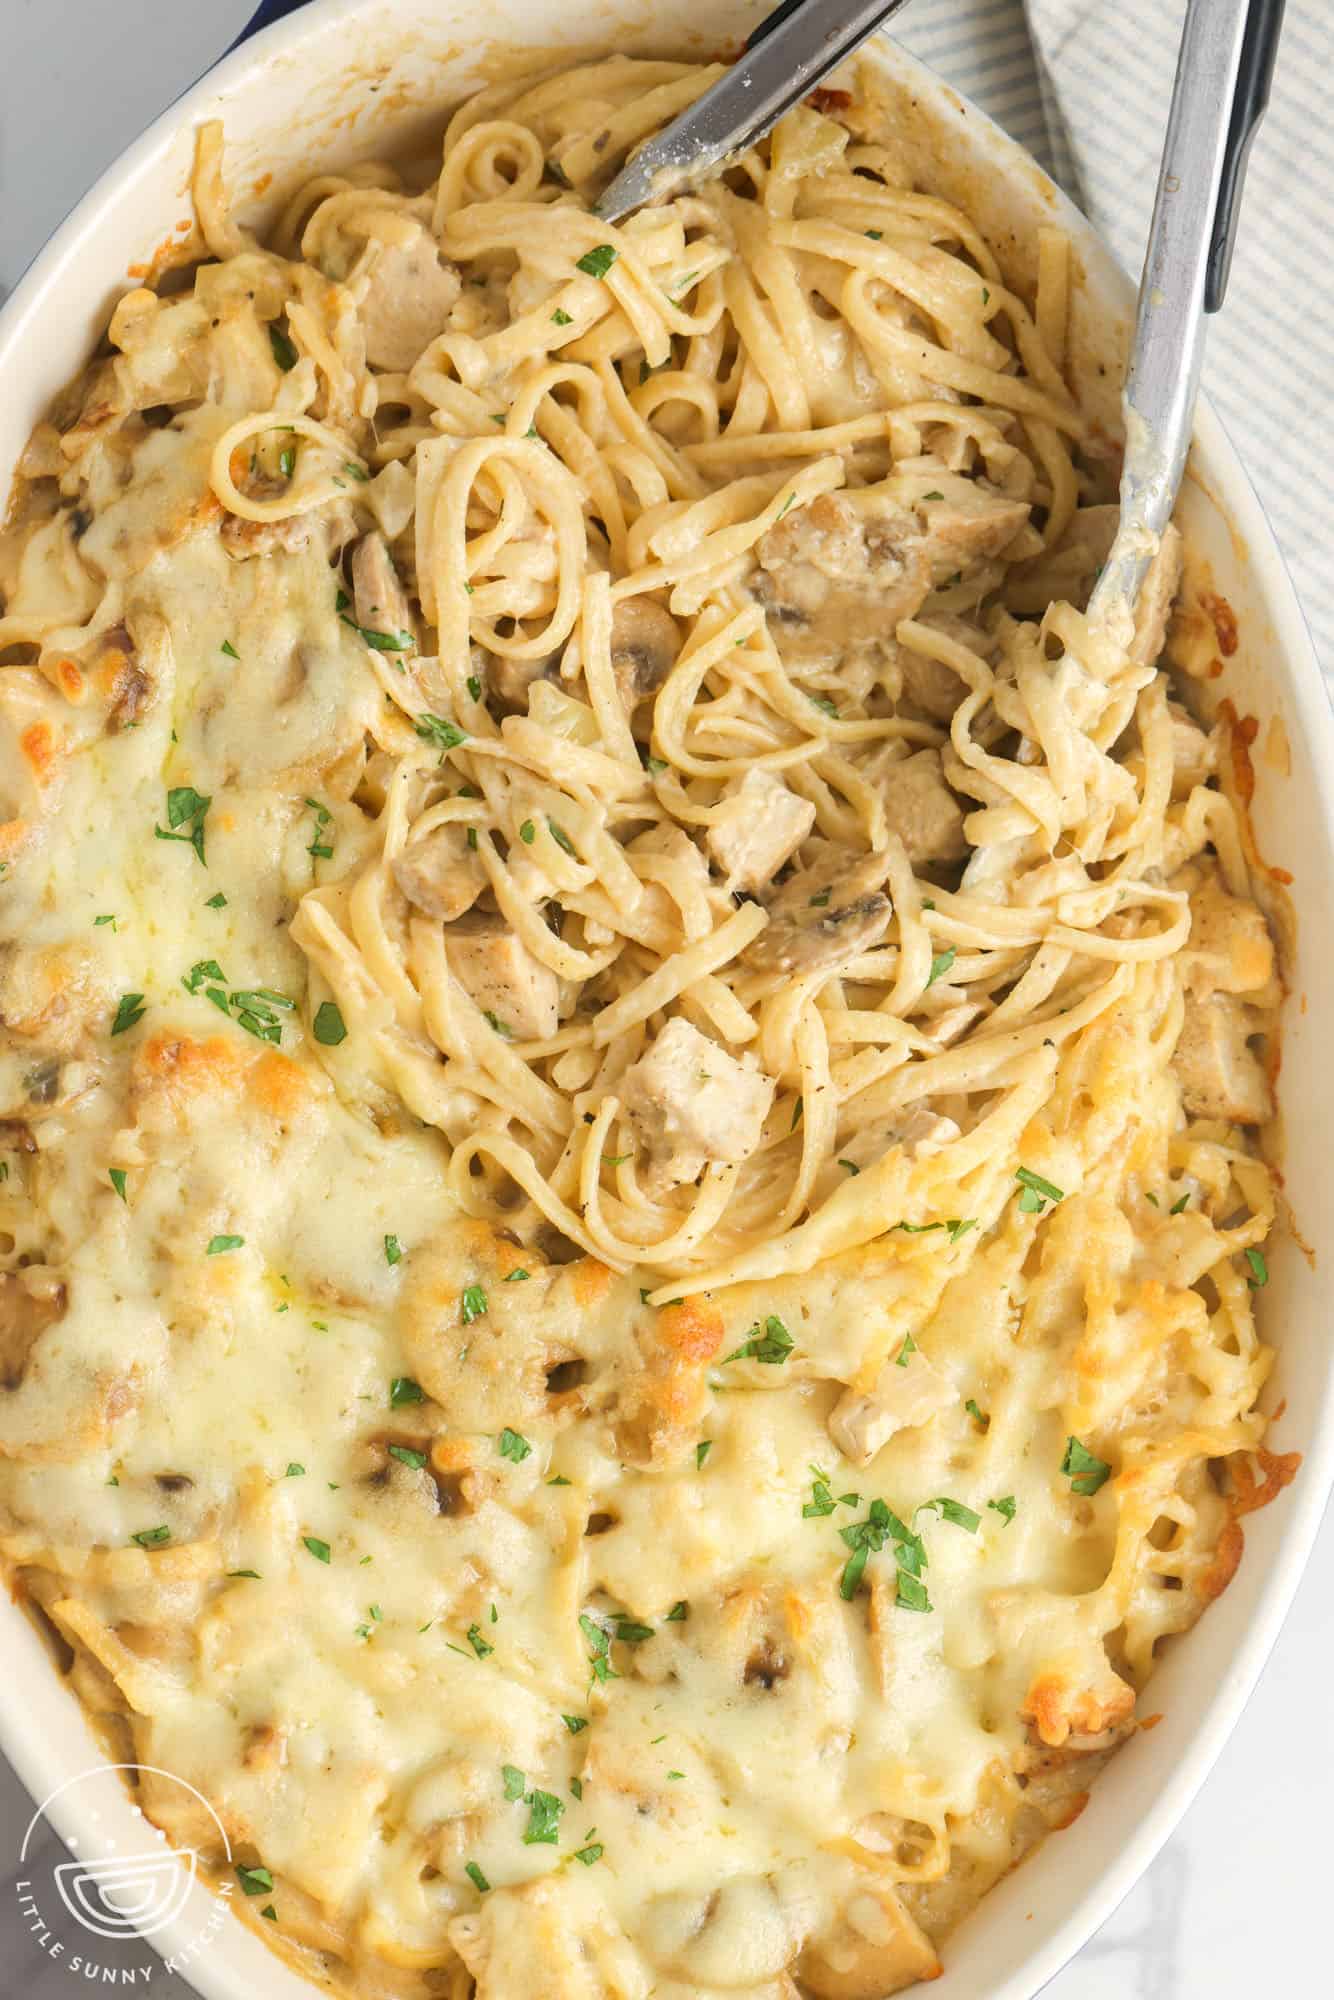 chicken tetrazzini in a casserole dish, served with a pair of tongs.